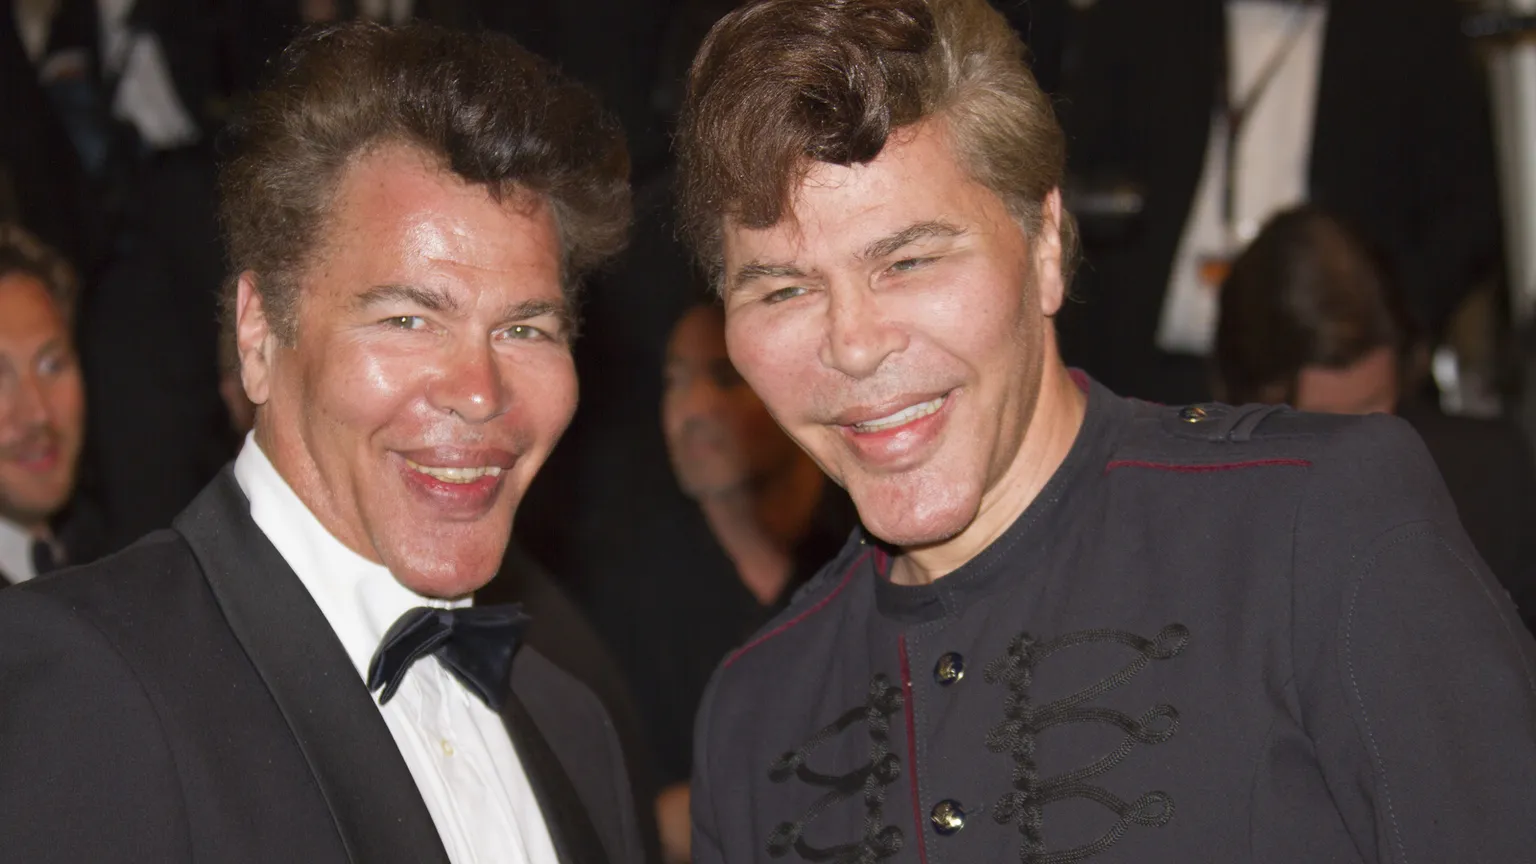 Igor Bogdanoff and Grichka Bogdanoff attend the 'Michael Kohlhaas' premiere during The 66th Cannes Film Festival, 2013. Image: Shutterstock